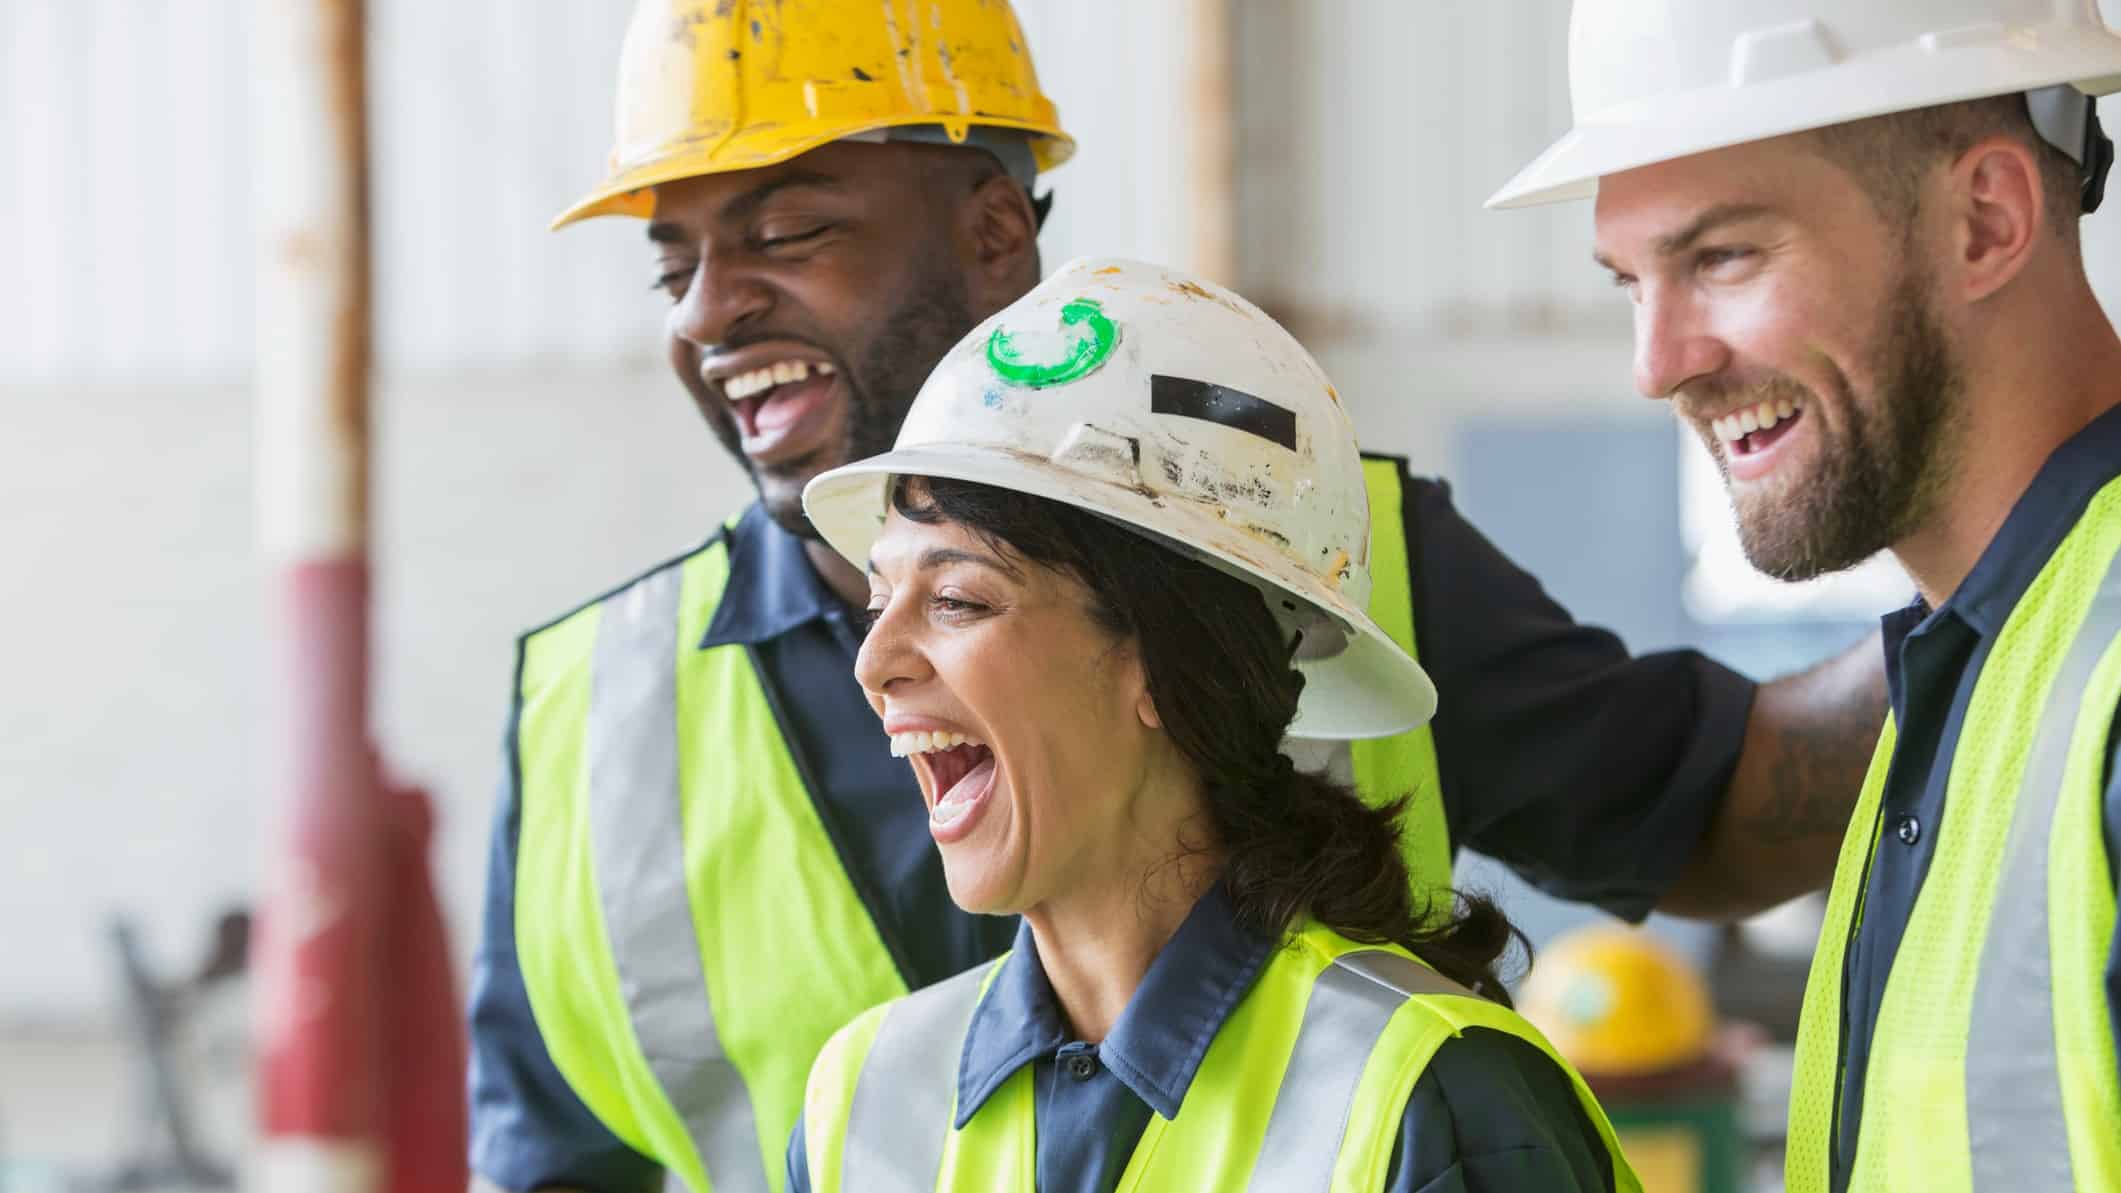 One female and two males construction crew in hard hats laughing.